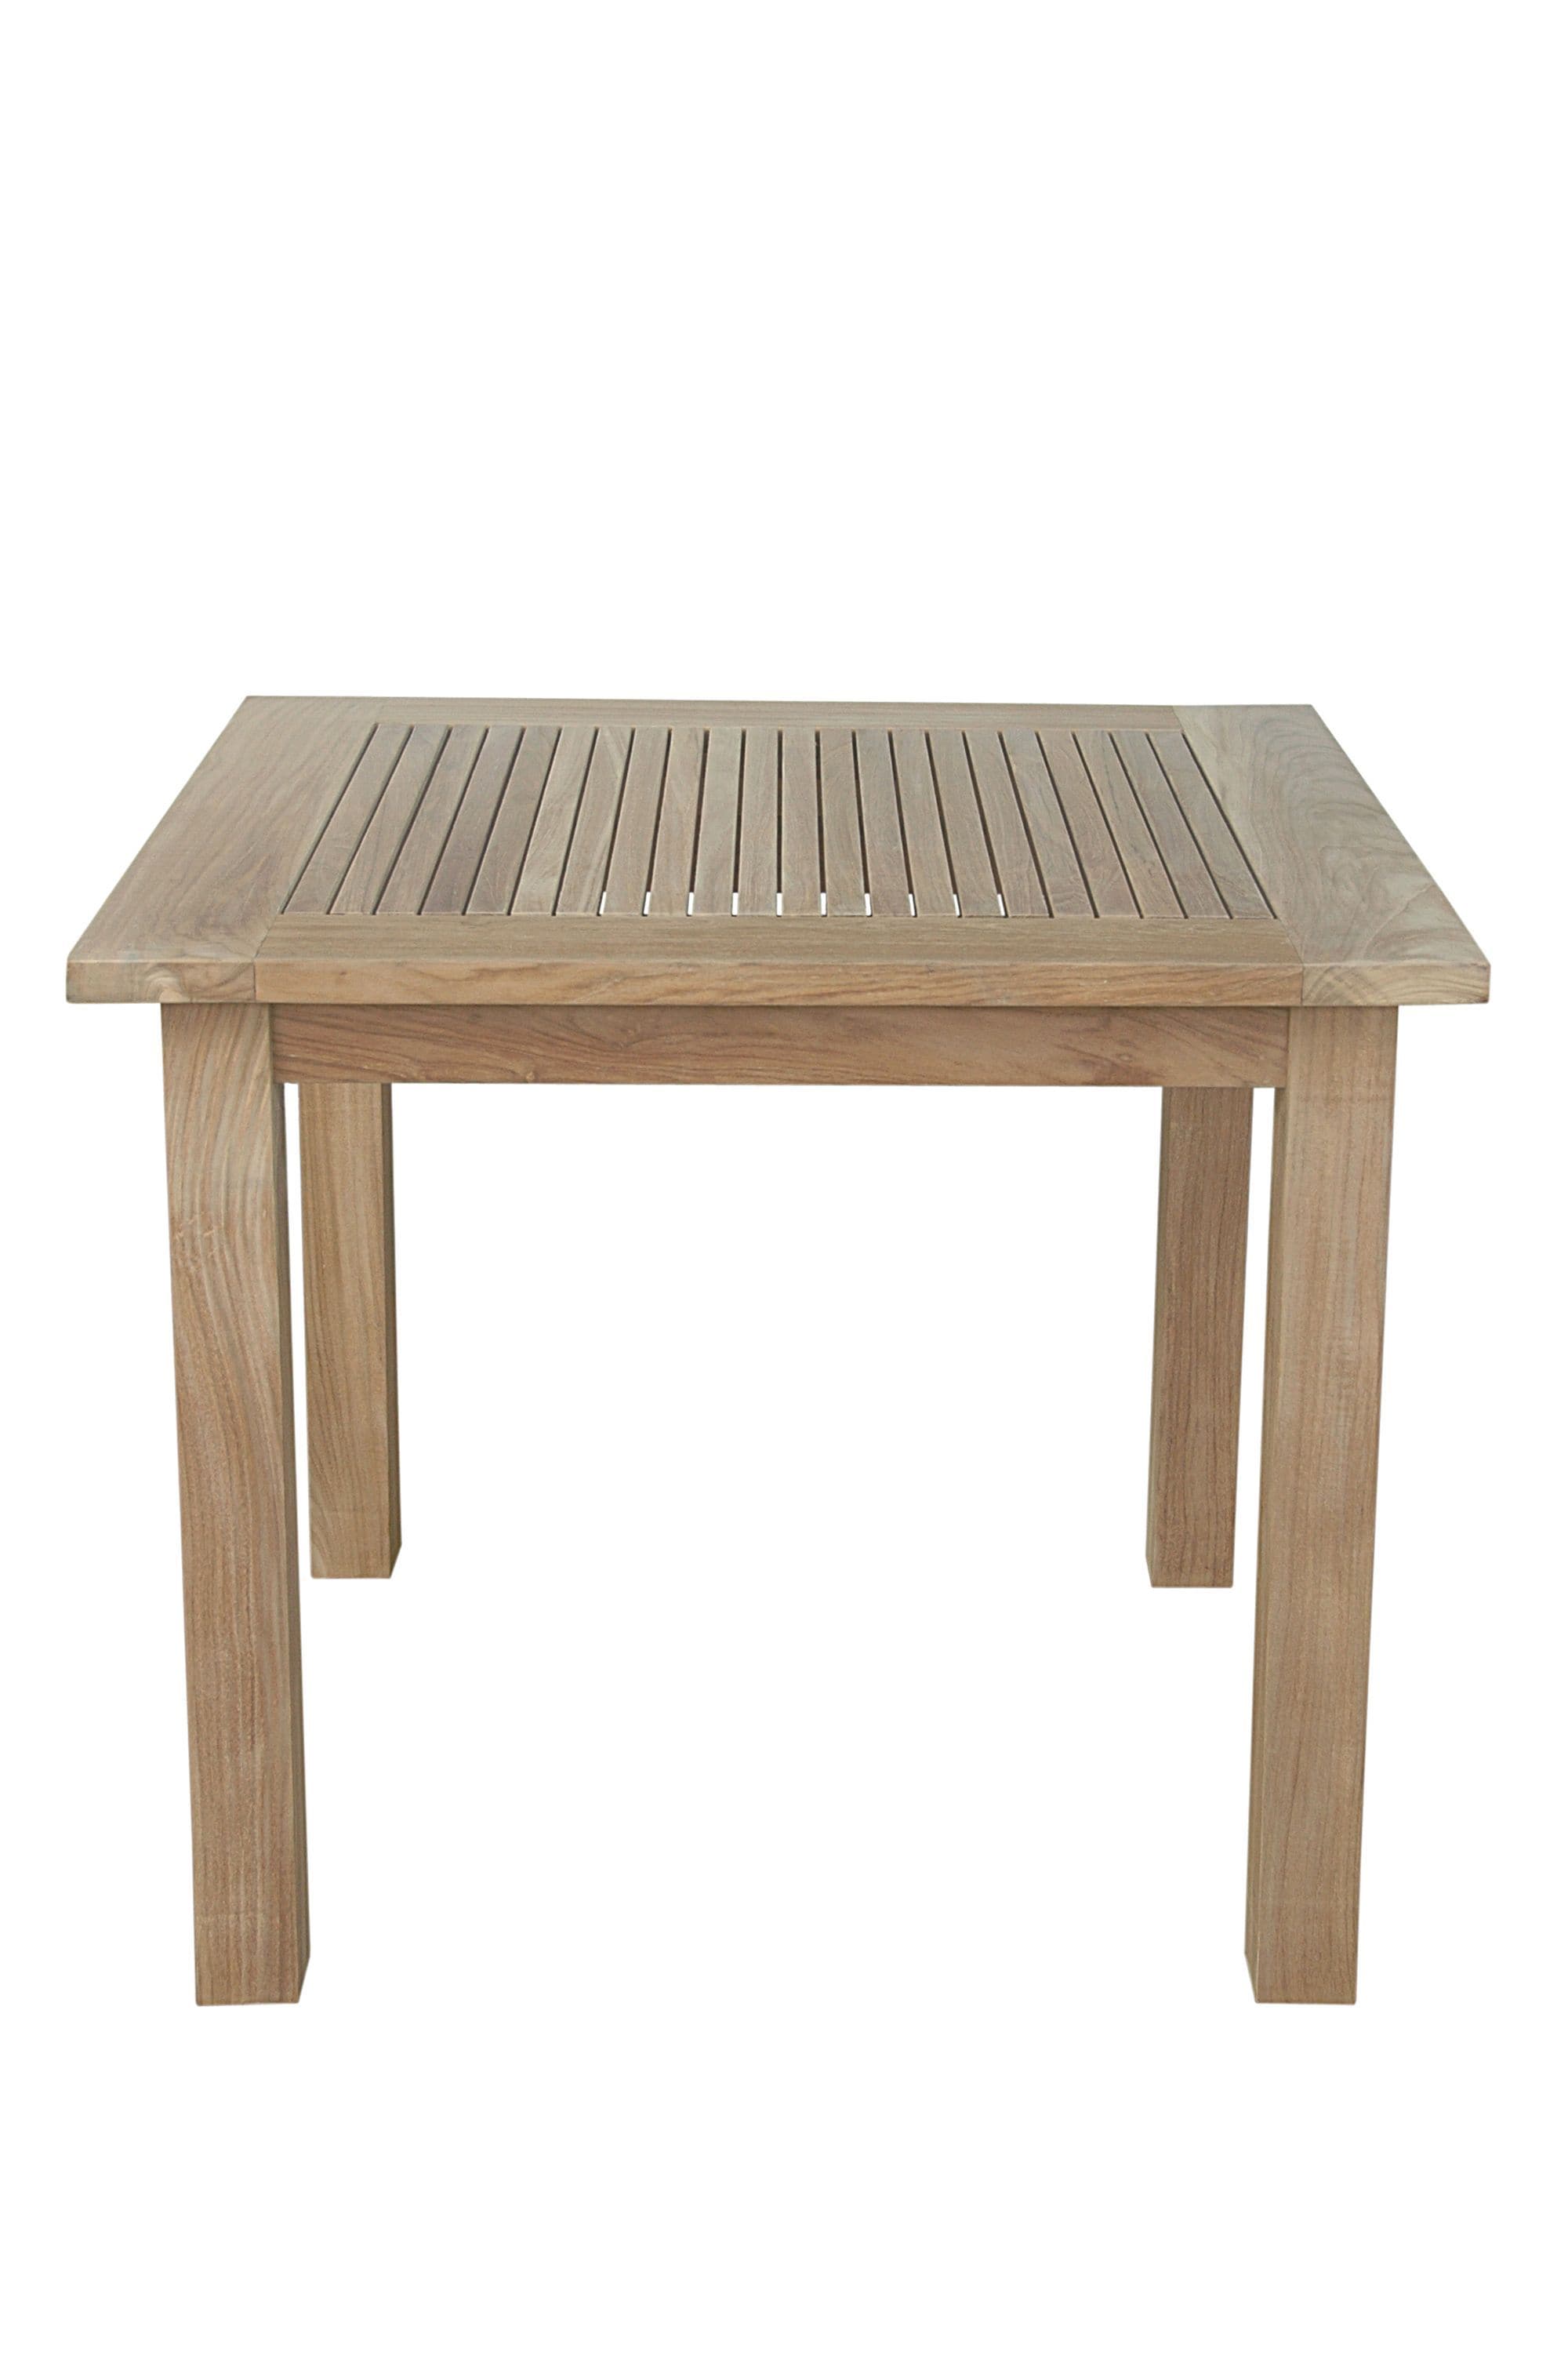 Anderson Teak Outdoor Coffee Table Anderson Teak Bahama 35" Square Table Small Slats